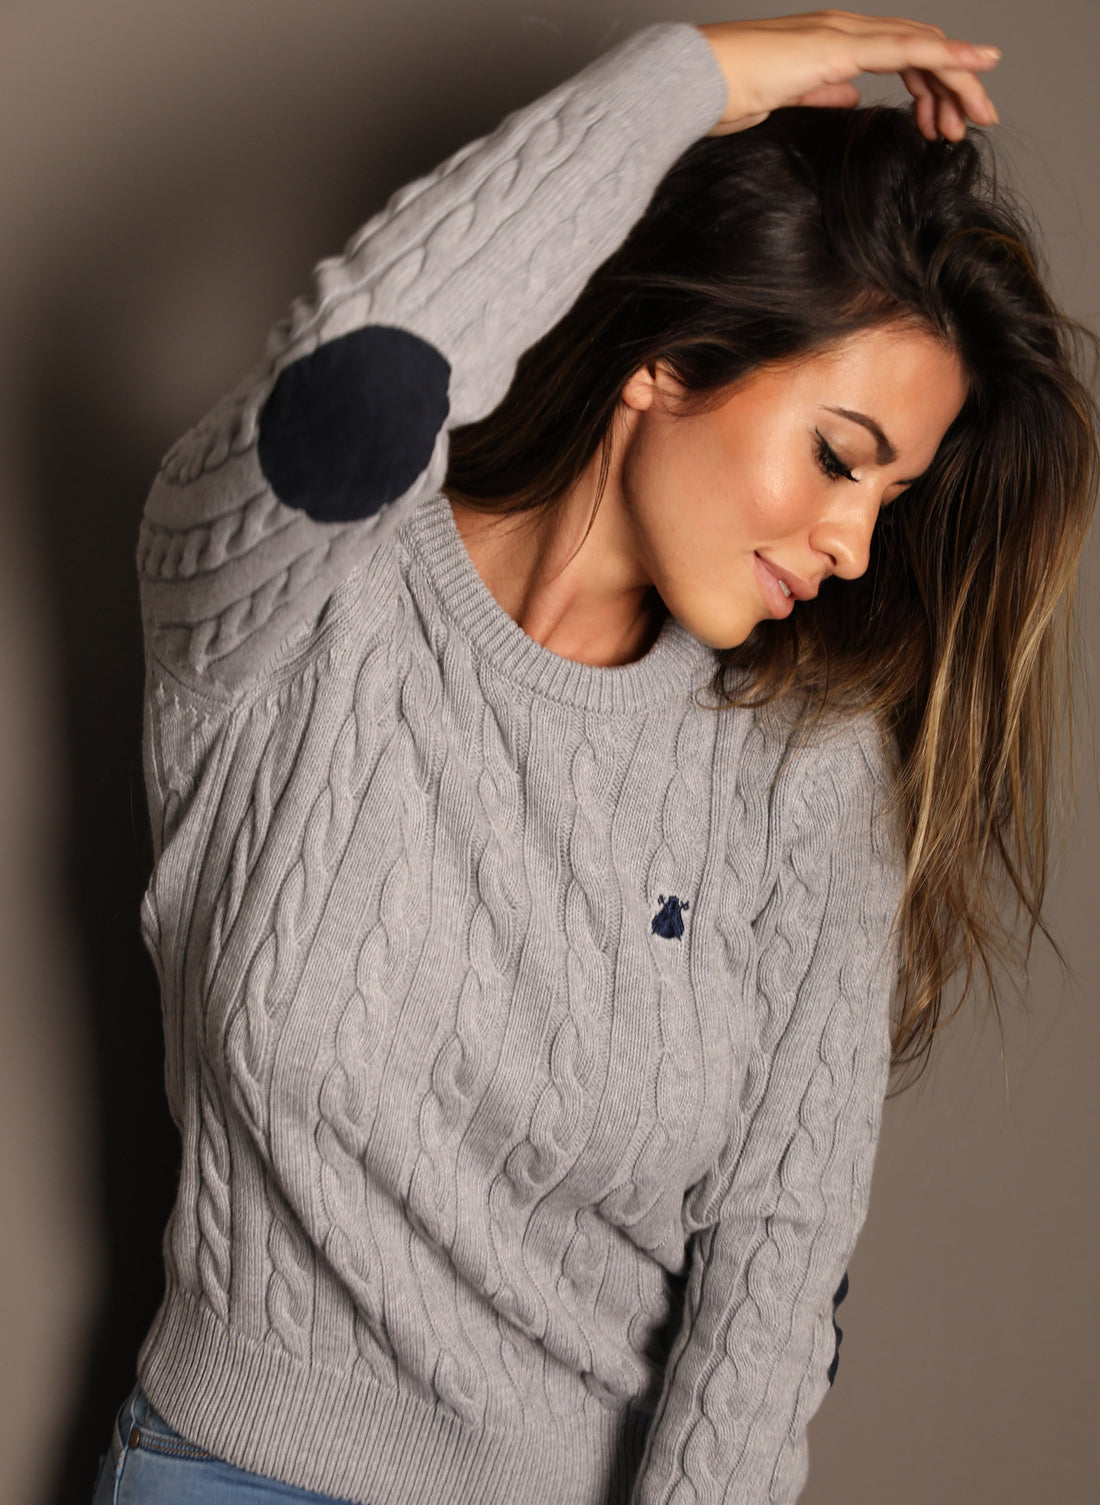 Women's Gray Cable Knit Sweater with Elbow Pads